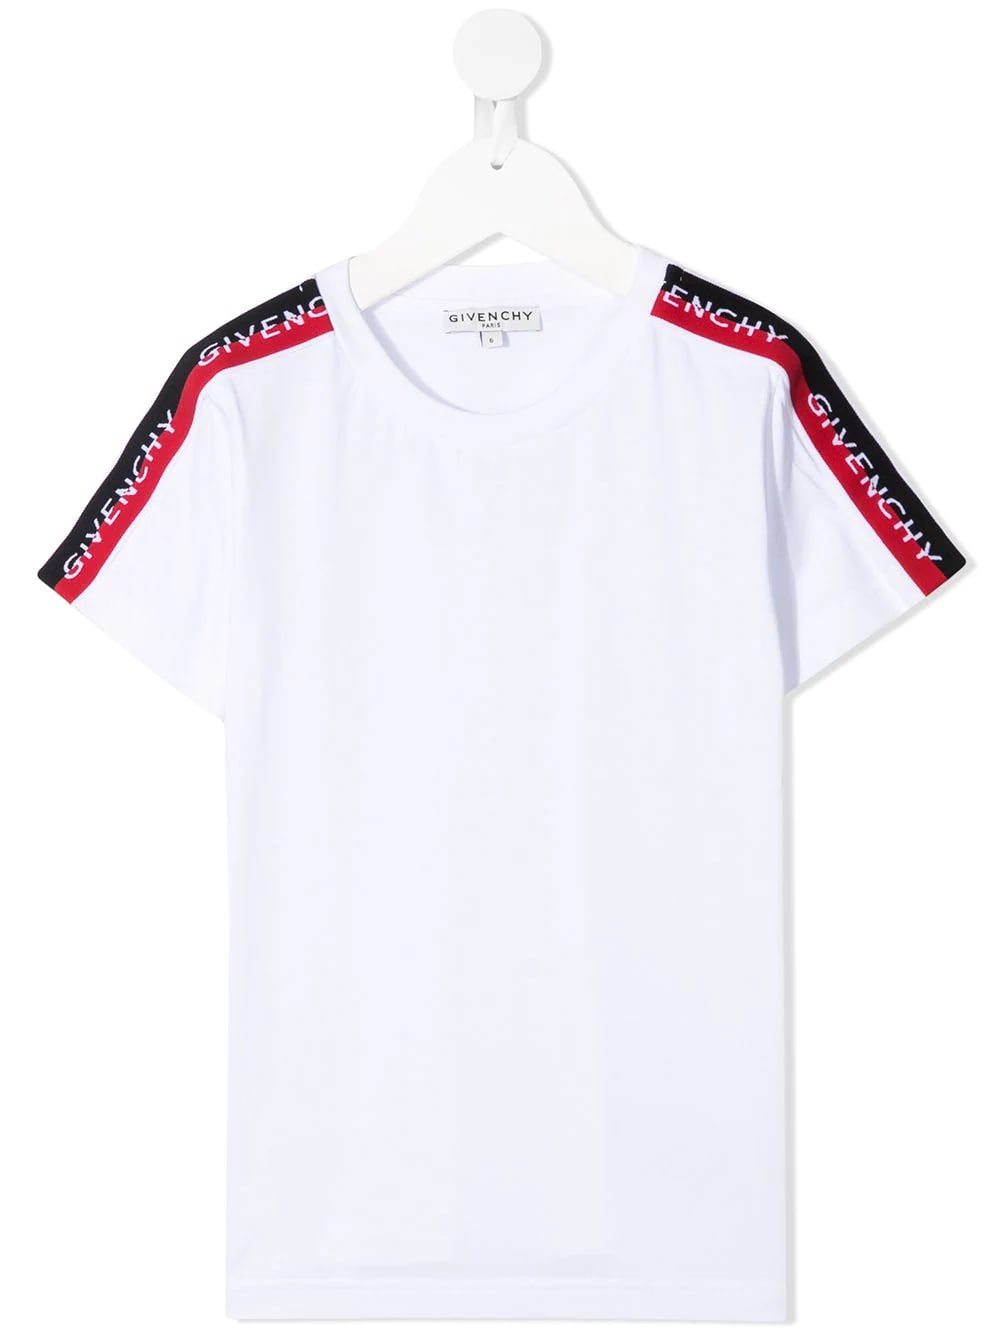 GIVENCHY KID WHITE T-SHIRT WITH LOGOED STRIPES,H25246 10B